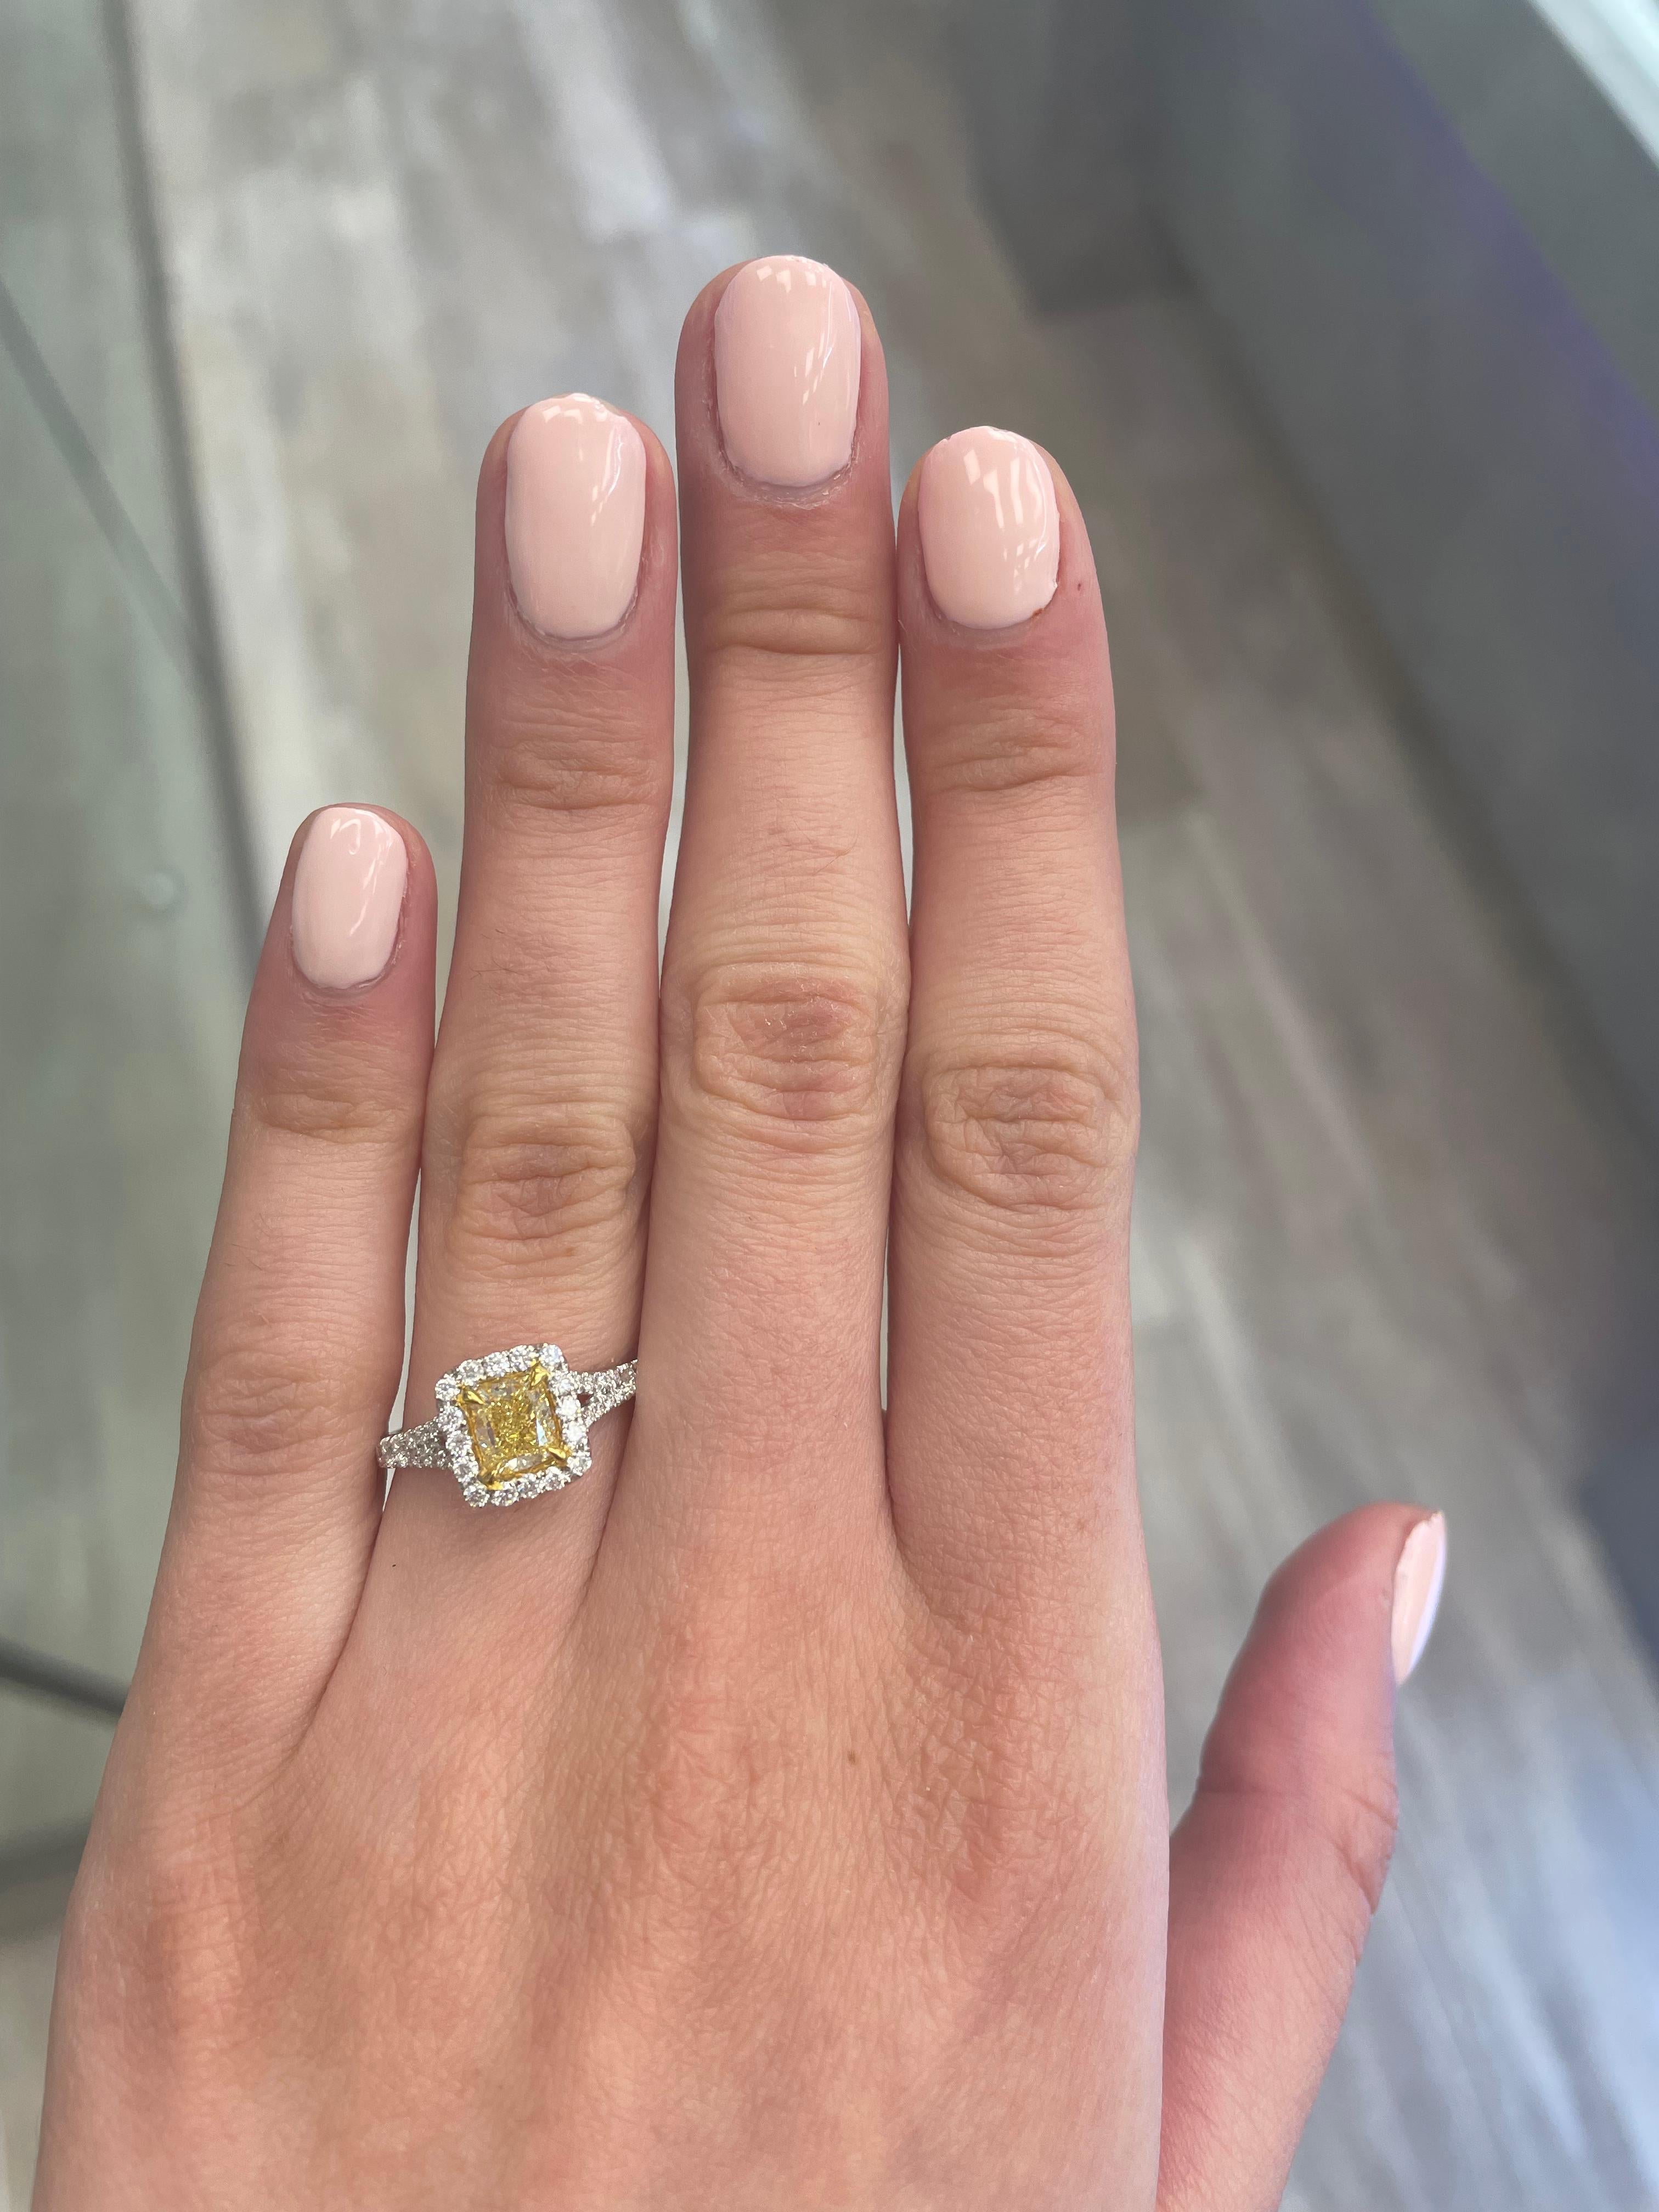 Stunning modern EGL certified yellow diamond with halo ring, two-tone 18k yellow and white gold. By Alexander Beverly Hills
1.51 carats total diamond weight.
1.00 carat cushion cut Fancy Intense Yellow color and SI1 clarity diamond, EGL graded.